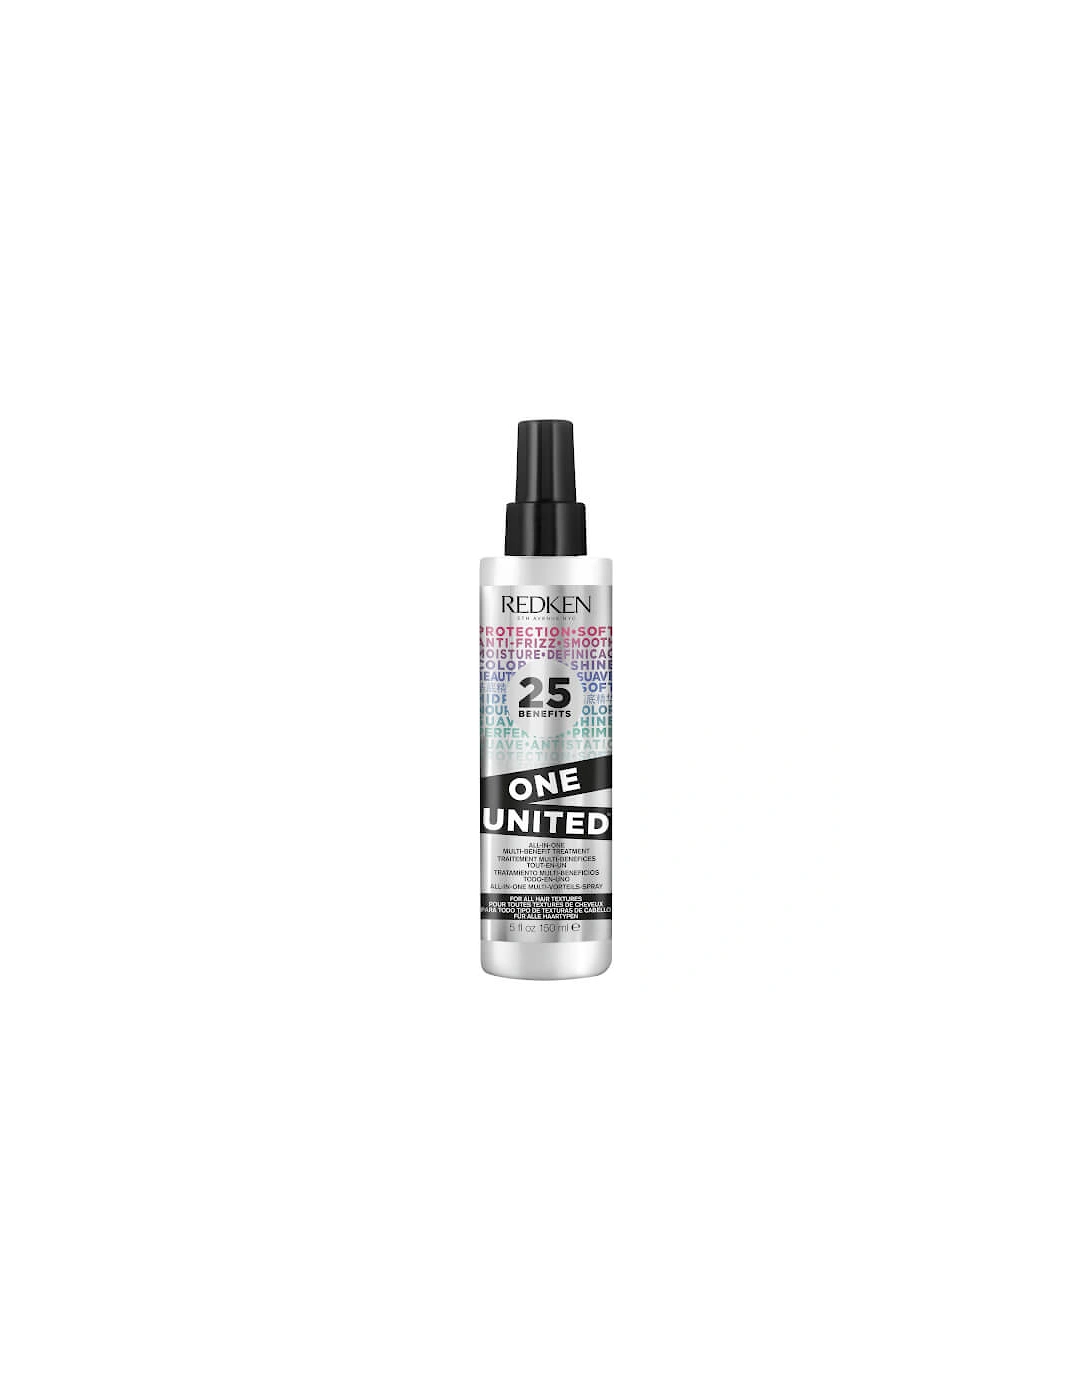 One United Multi-Benefit Treatment 150ml - Redken, 2 of 1